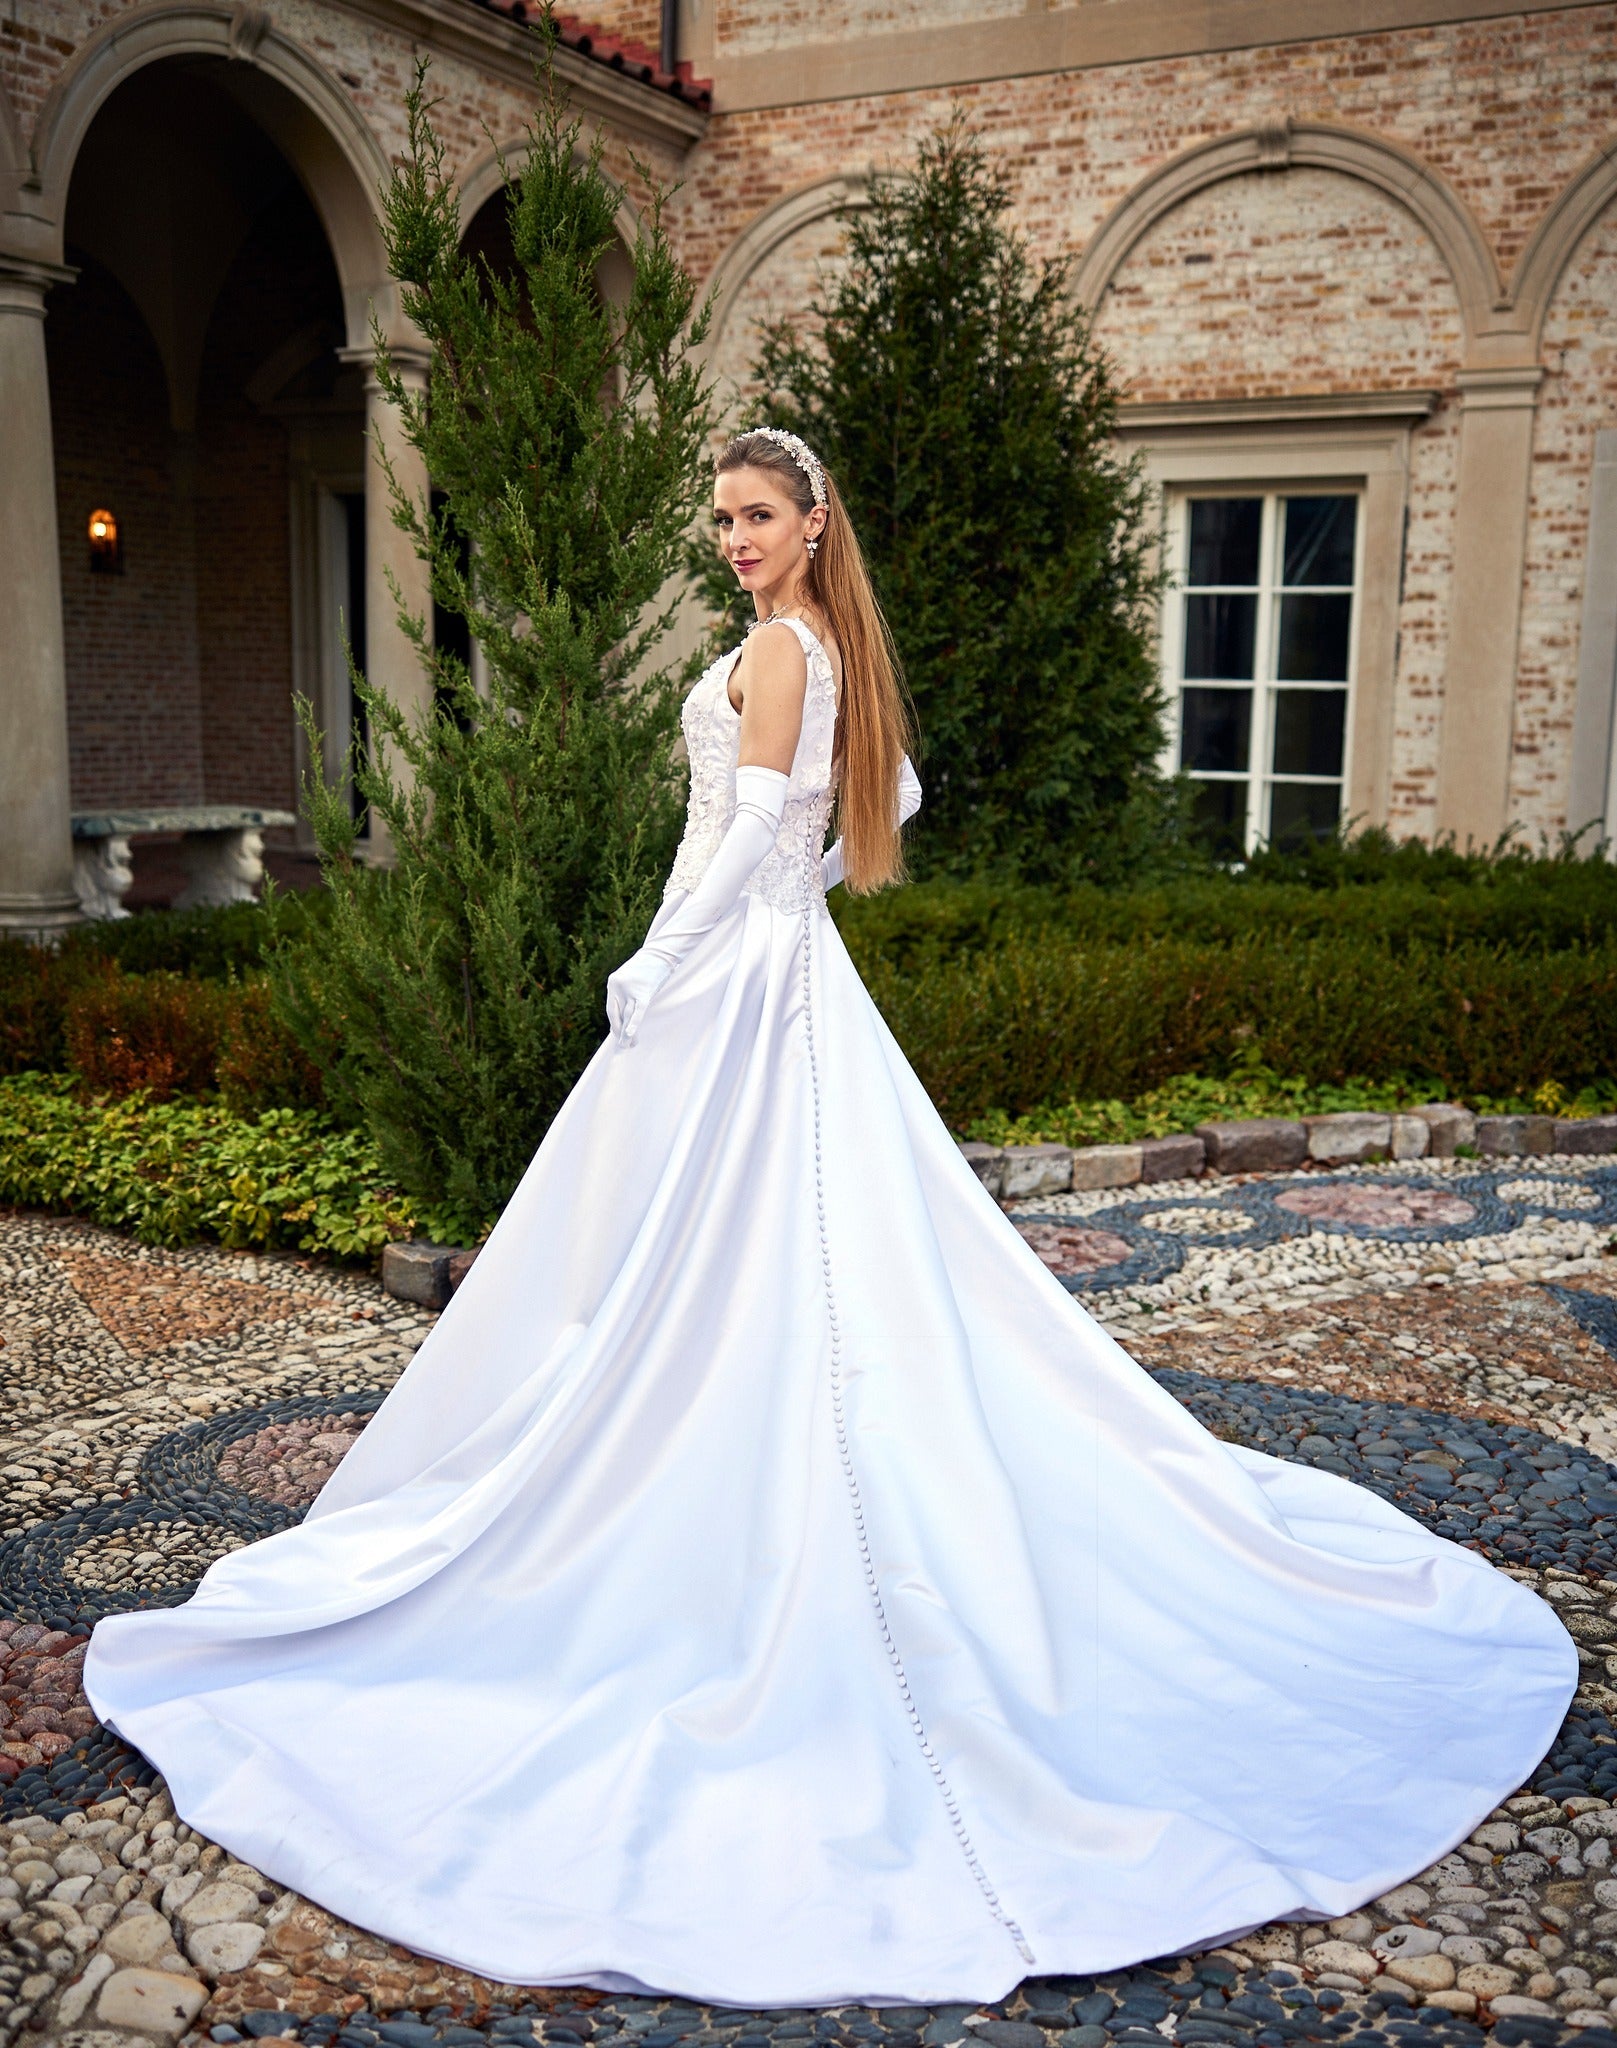 Bridal Gowns Collection: Elegant Wedding Dresses & Evening Gowns